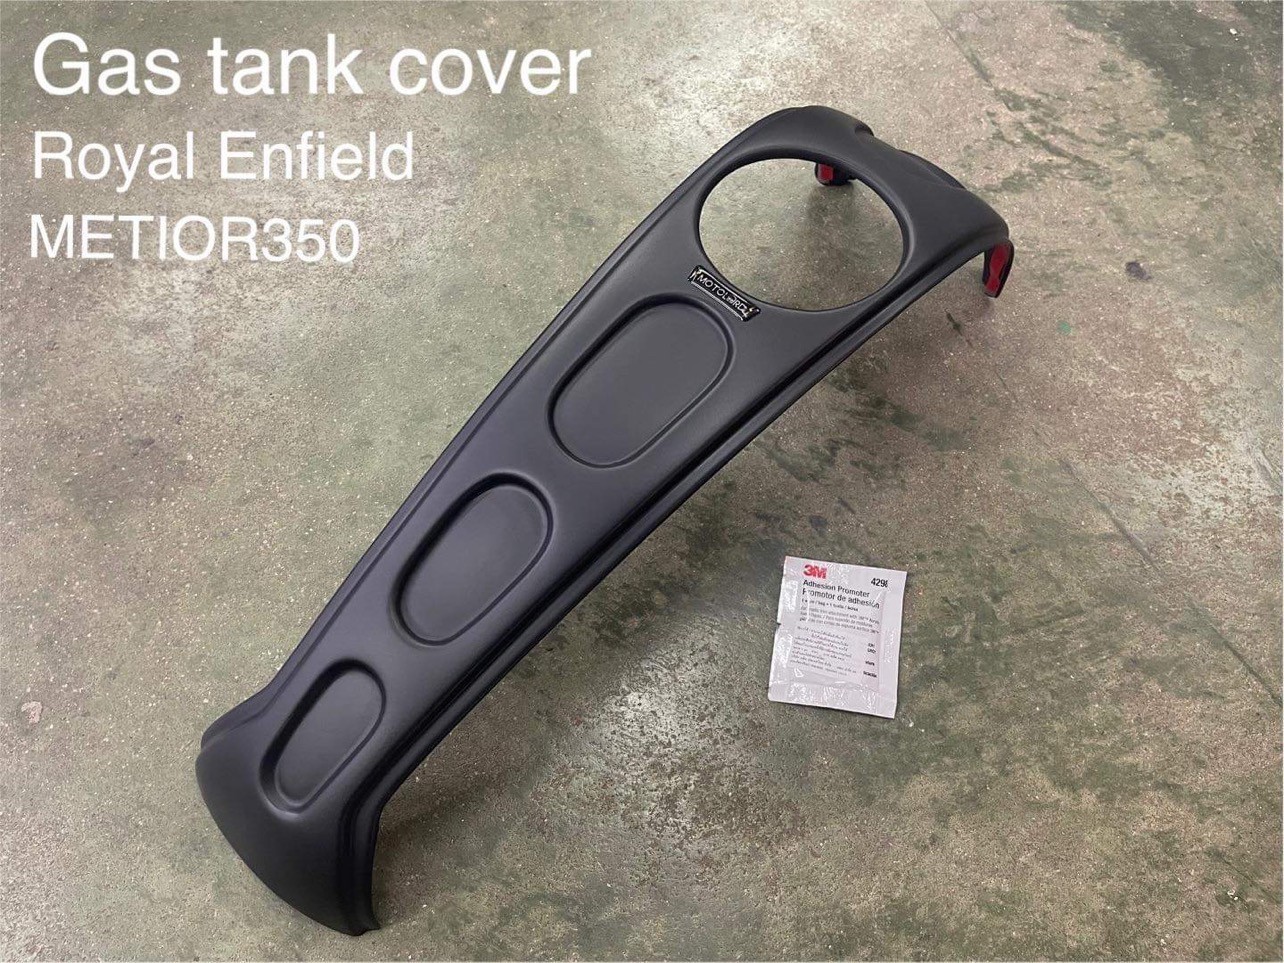 Gas Tank Cover MotoLorD For Royal Enfield METEO 350